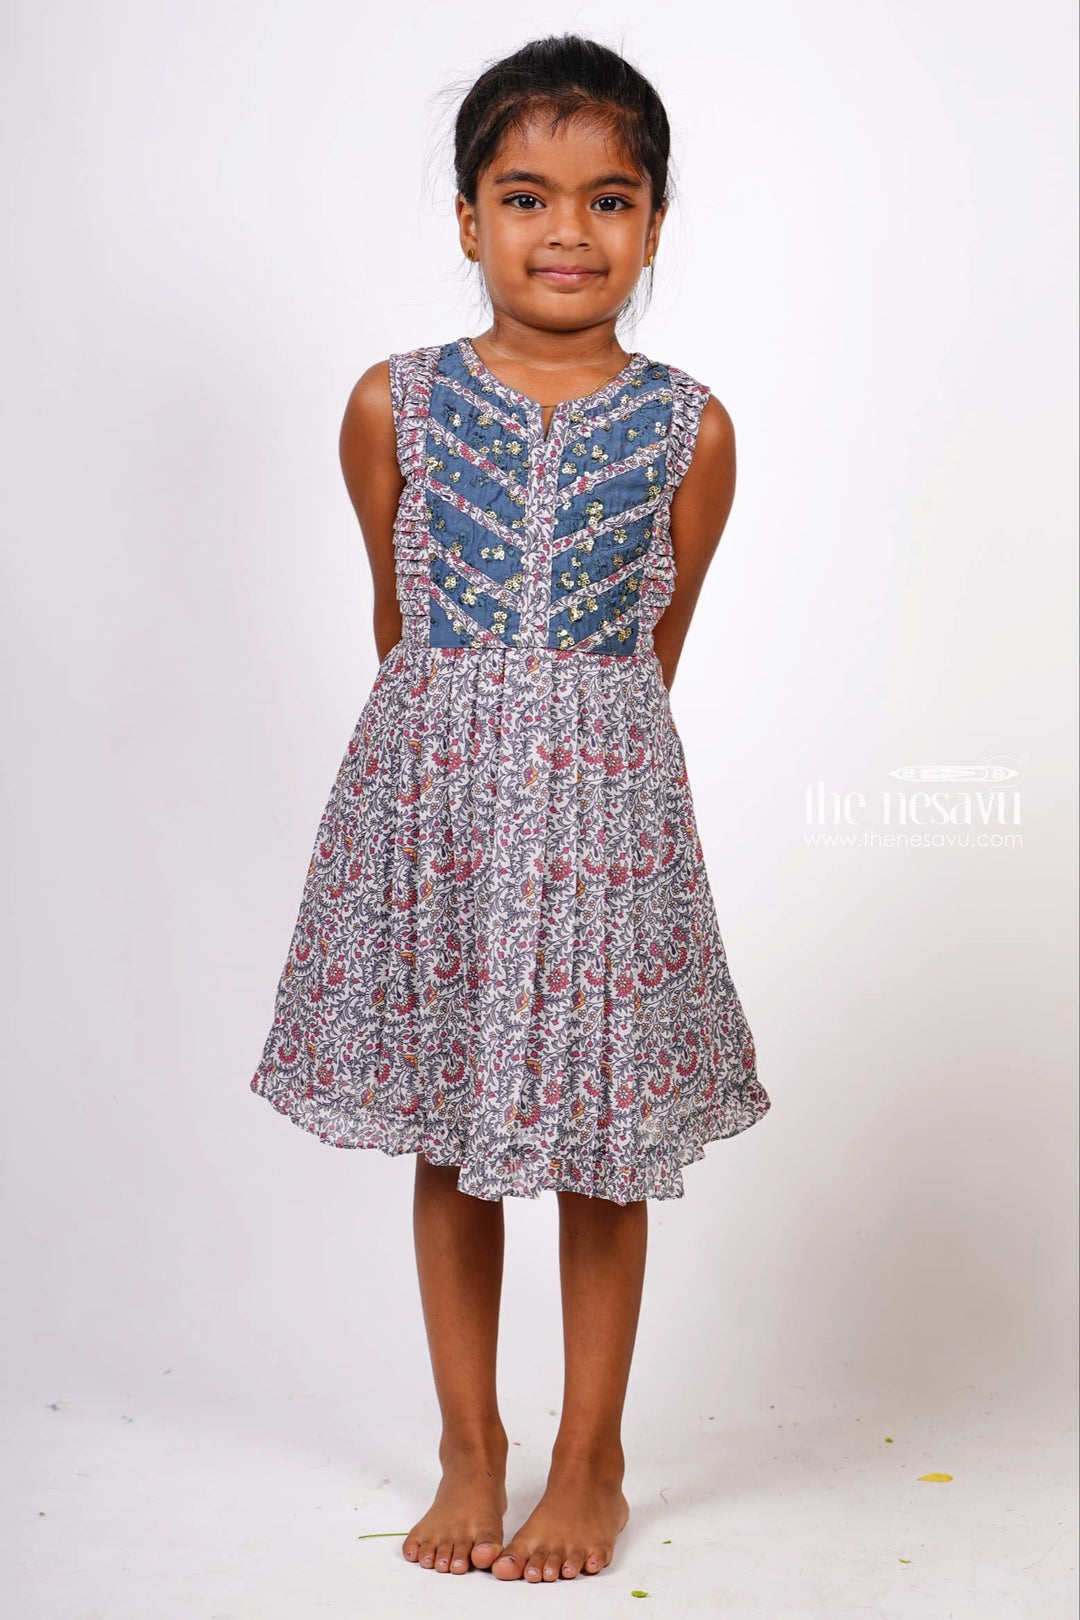 The Nesavu Girls Fancy Frock Floral Bush- Designer Baby Girls Cotton Frock With Fabric Trims Nesavu 16 (1Y) / Gray / Georgette GFC700A-16 Buy Girls Rayon Cotton Frocks For Daily Use | Modern Designs Patterns | The Nesavu